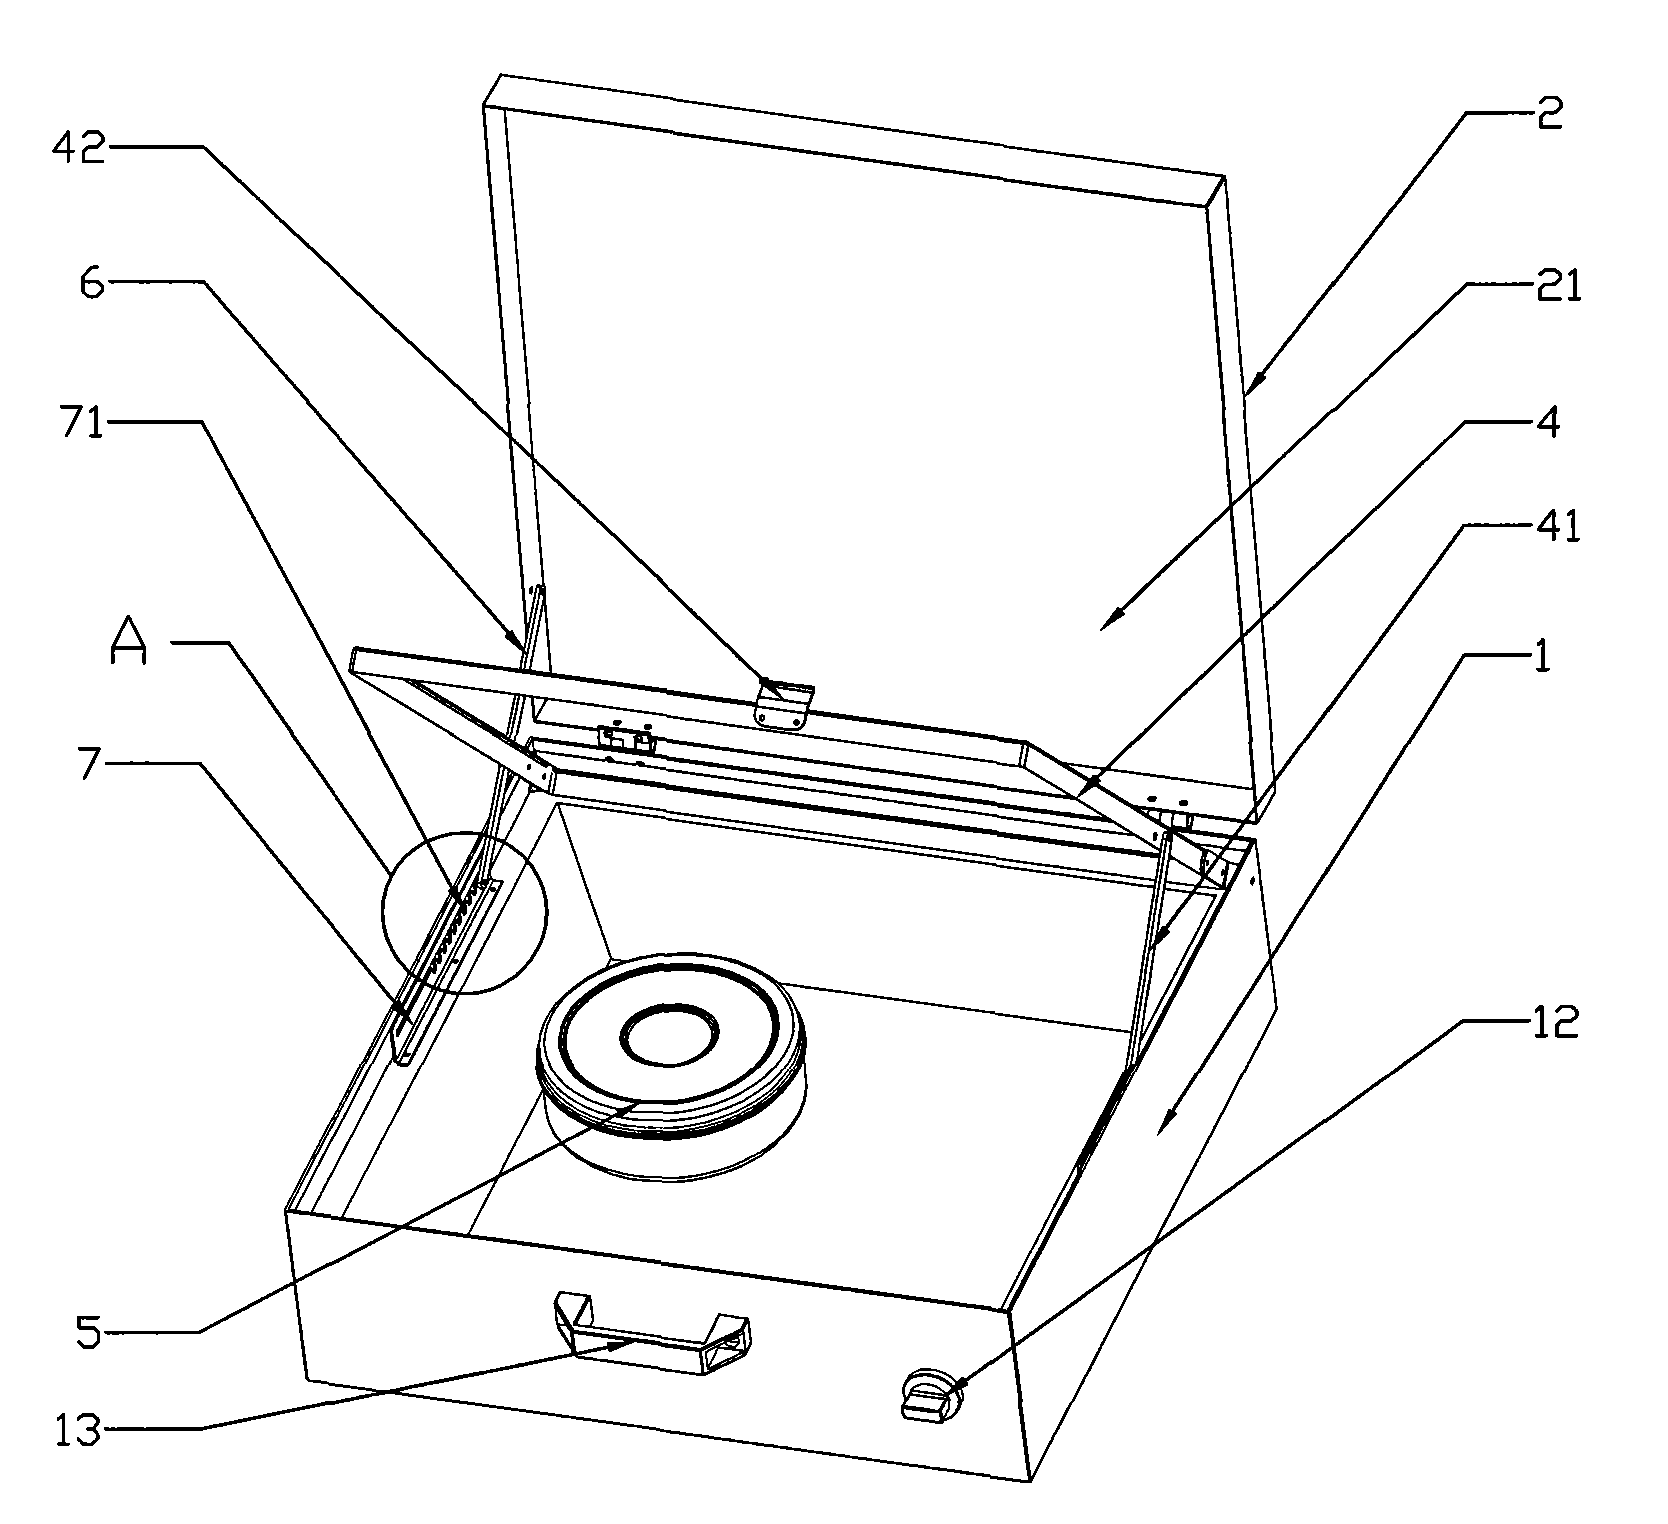 Solar cooking device